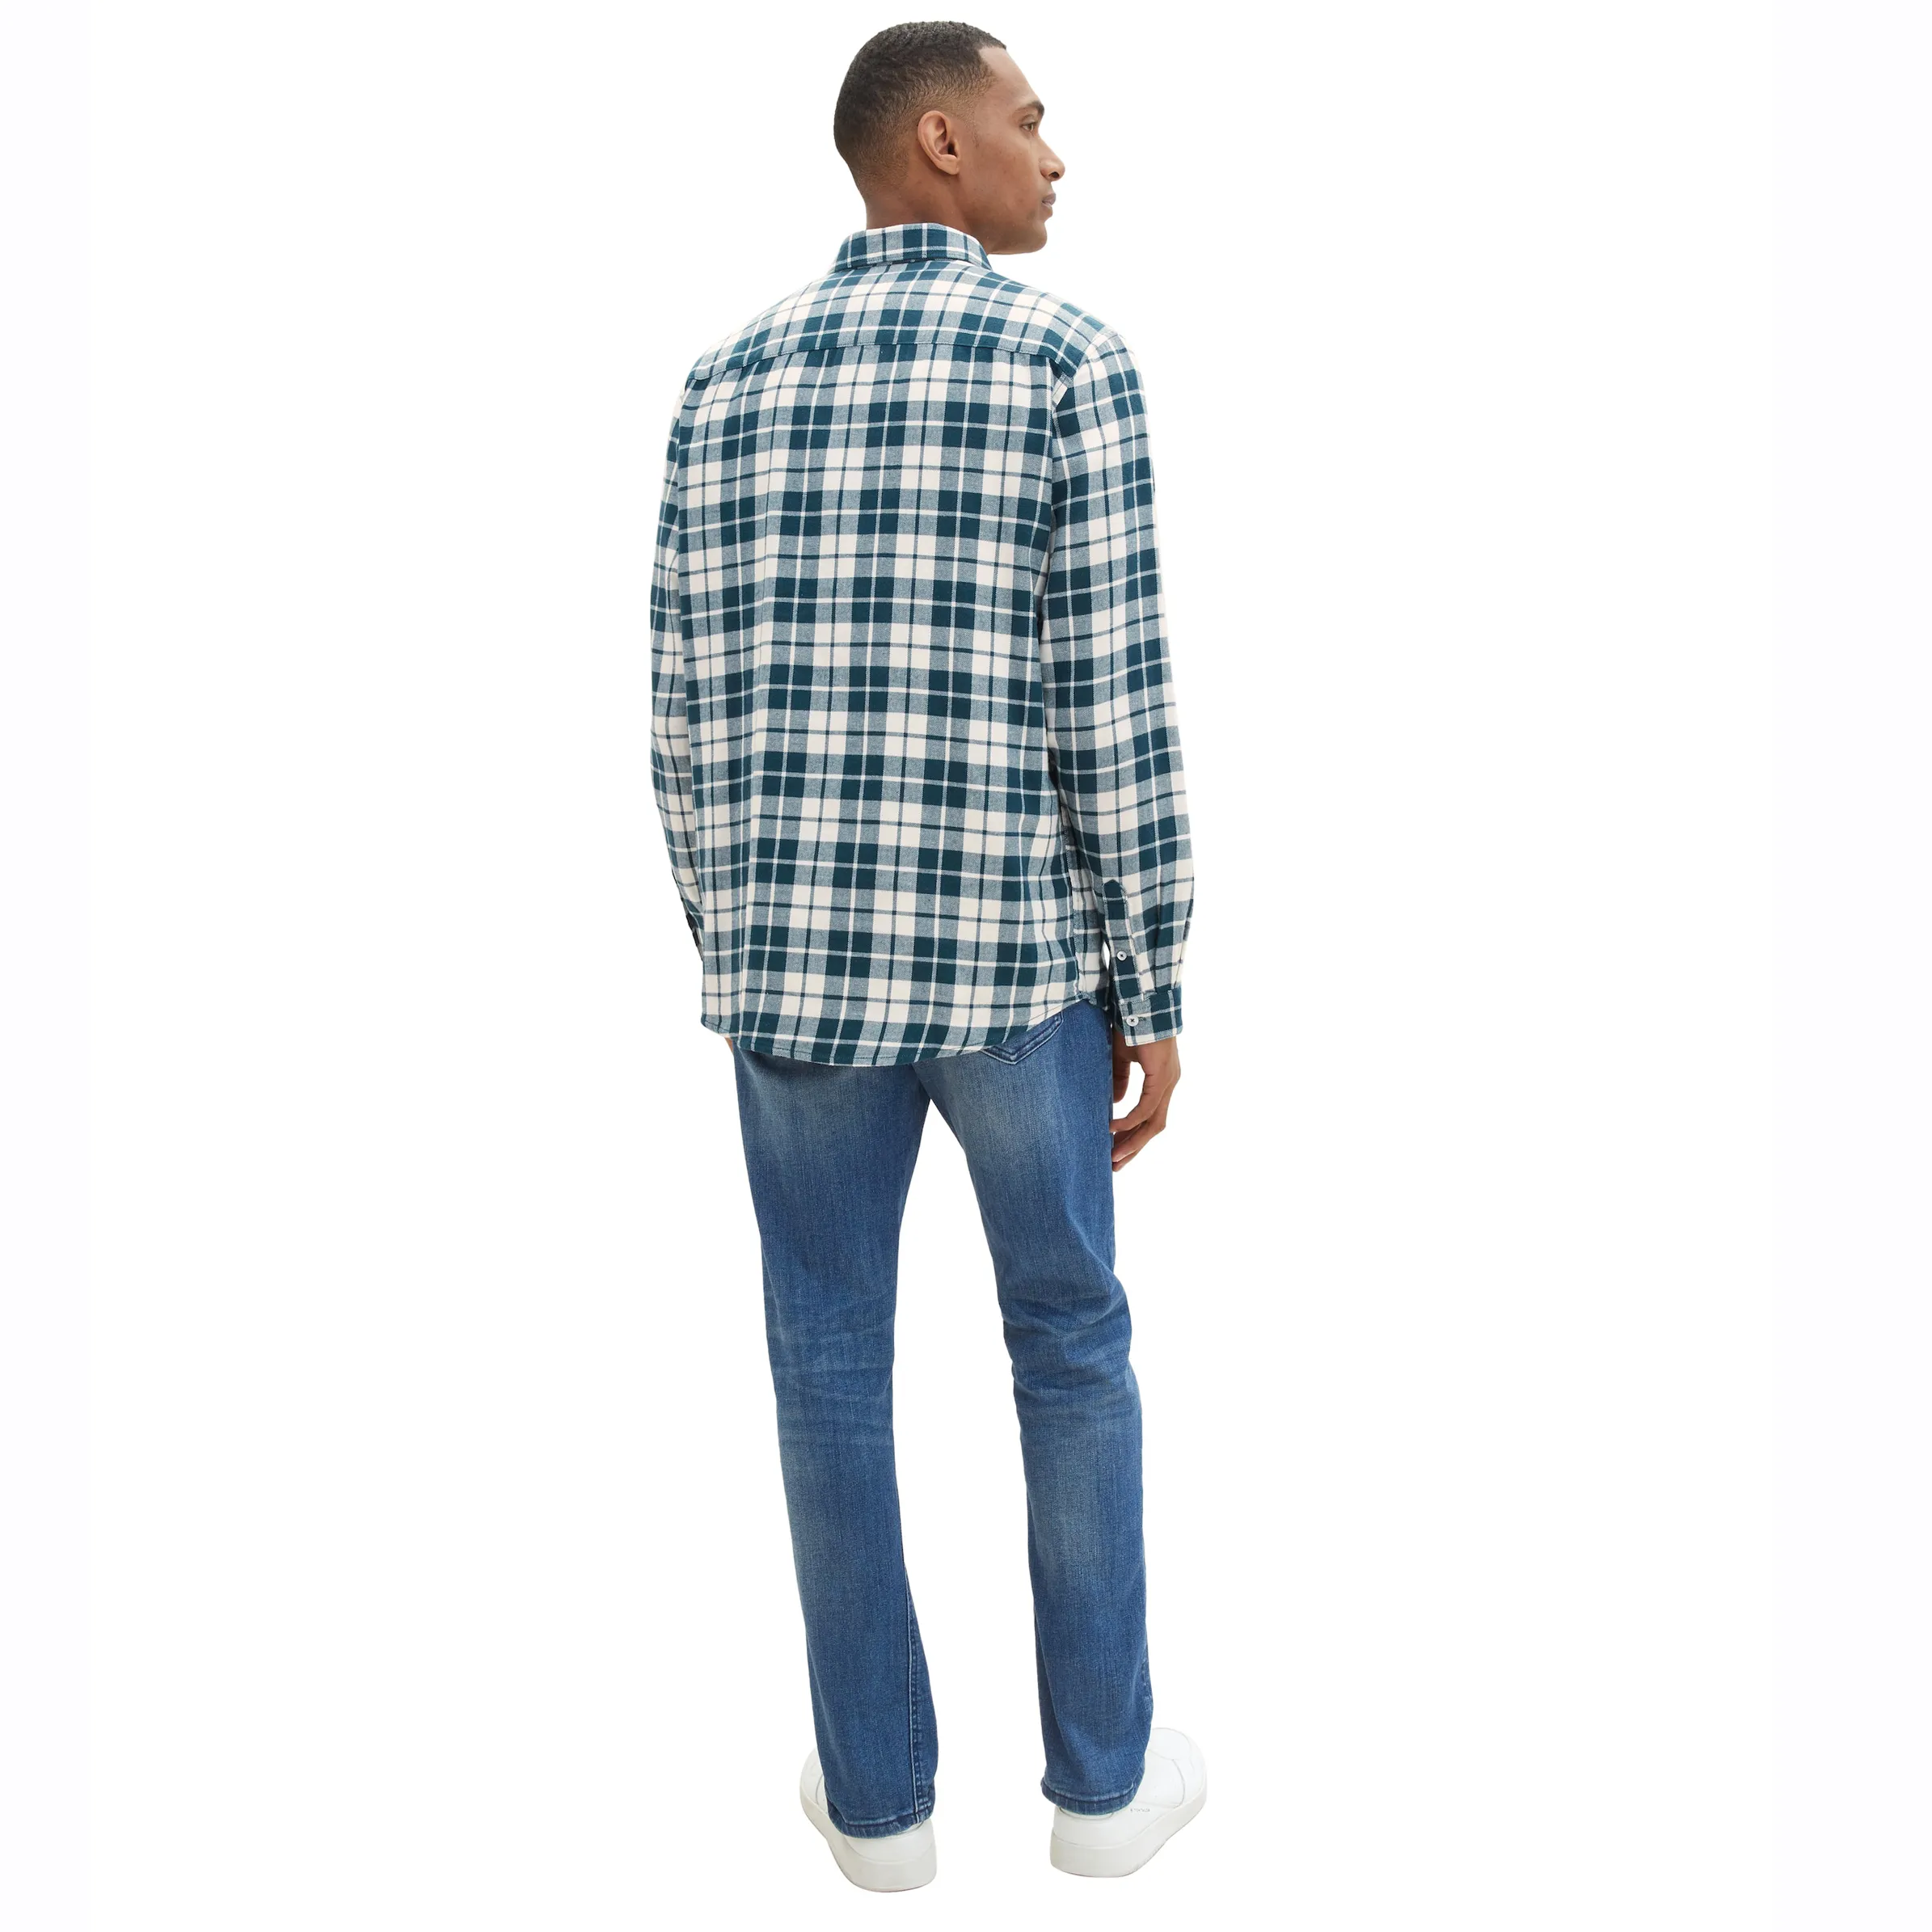 Tom Tailor 1038760 checked shirt Weiß 887480 33845 2